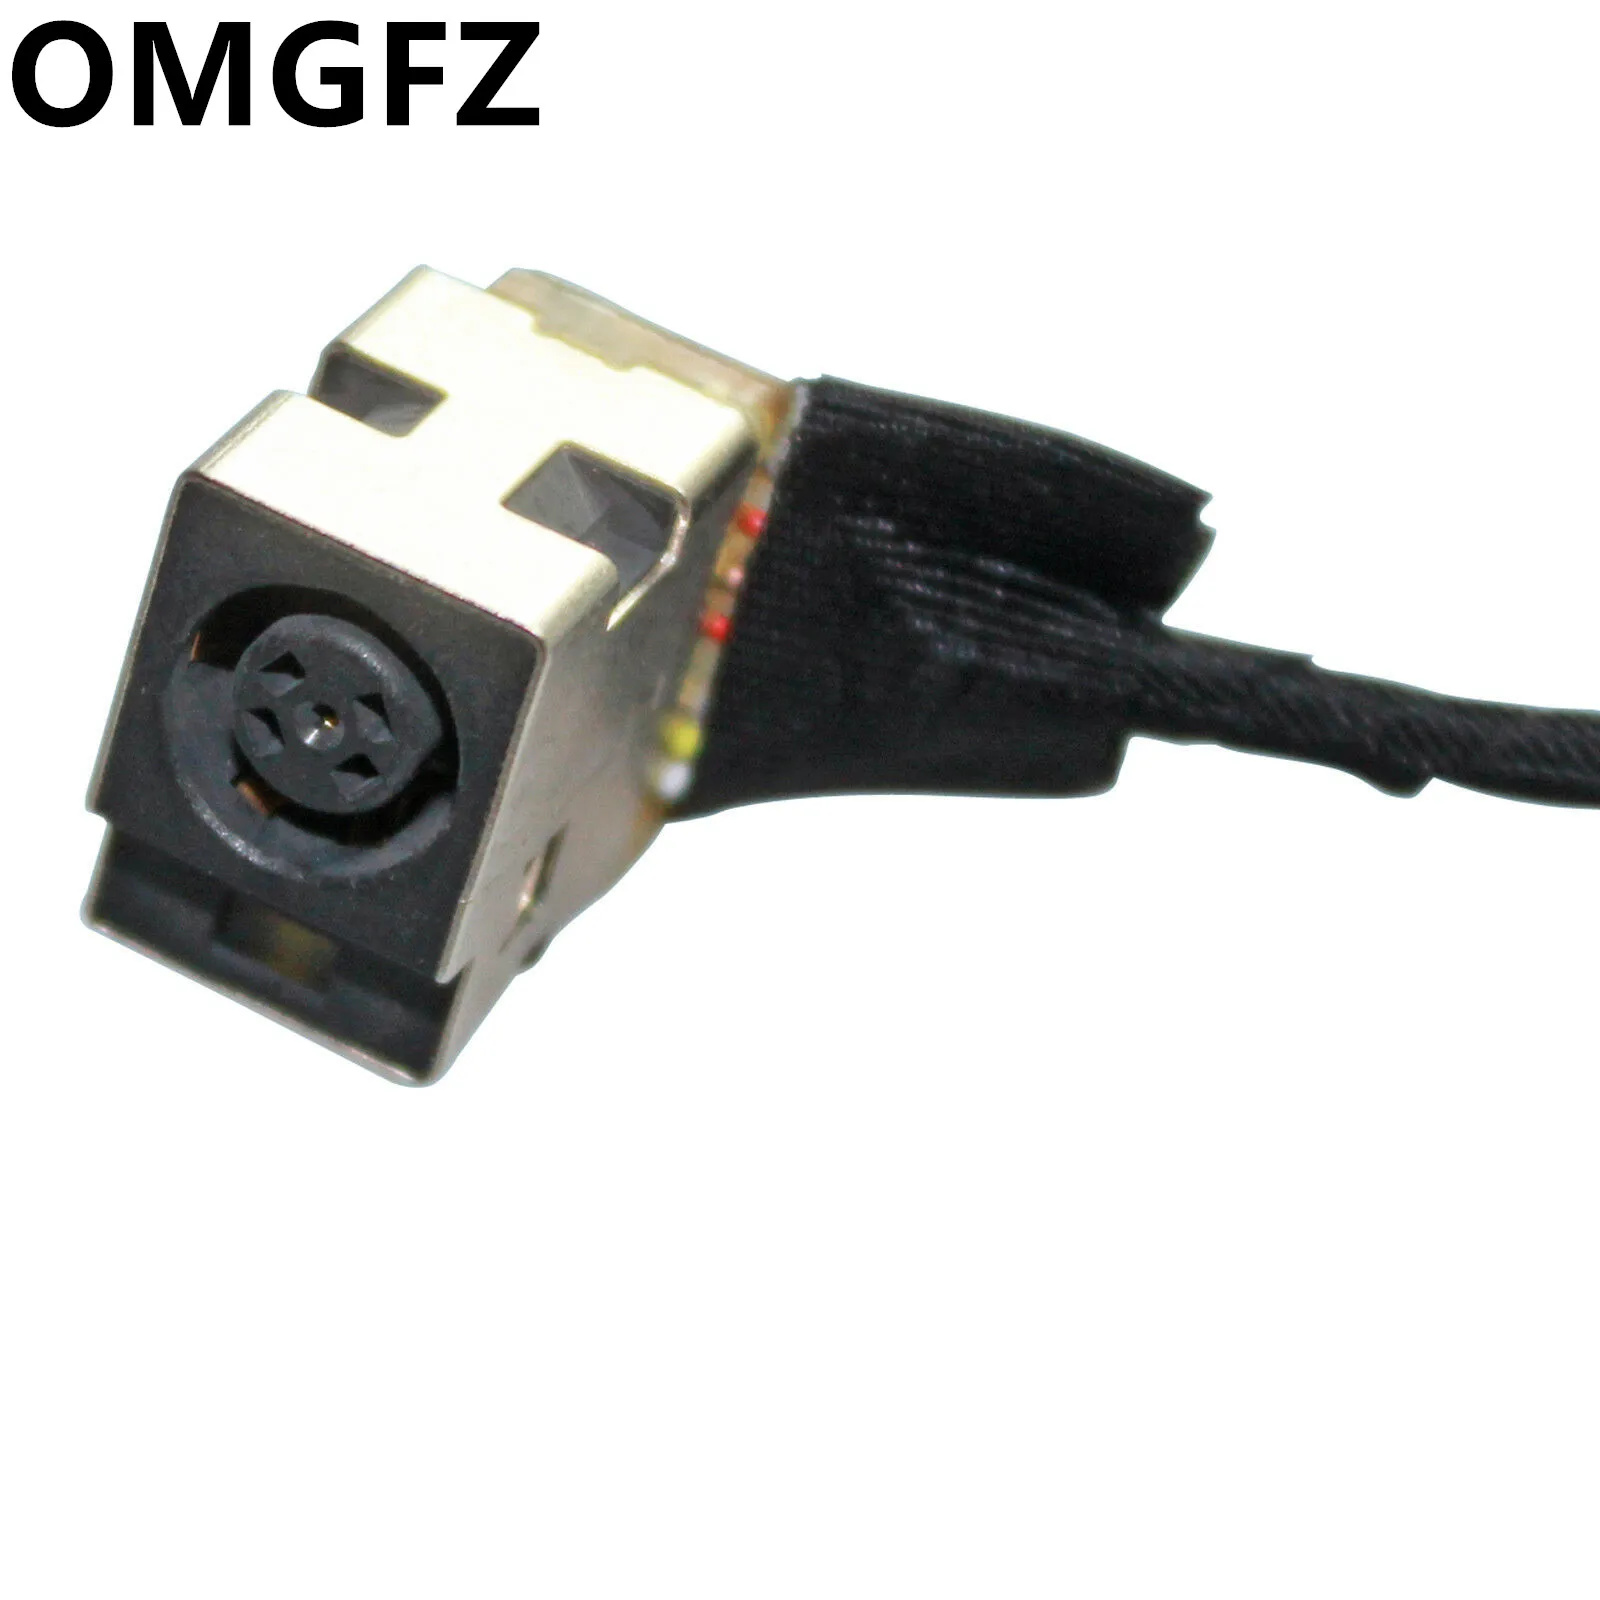 NEW DC Power Jack Plug SOCKET CABLE FOR HP Compaq G56 G62-100 602743-001 609154-001 images - 6